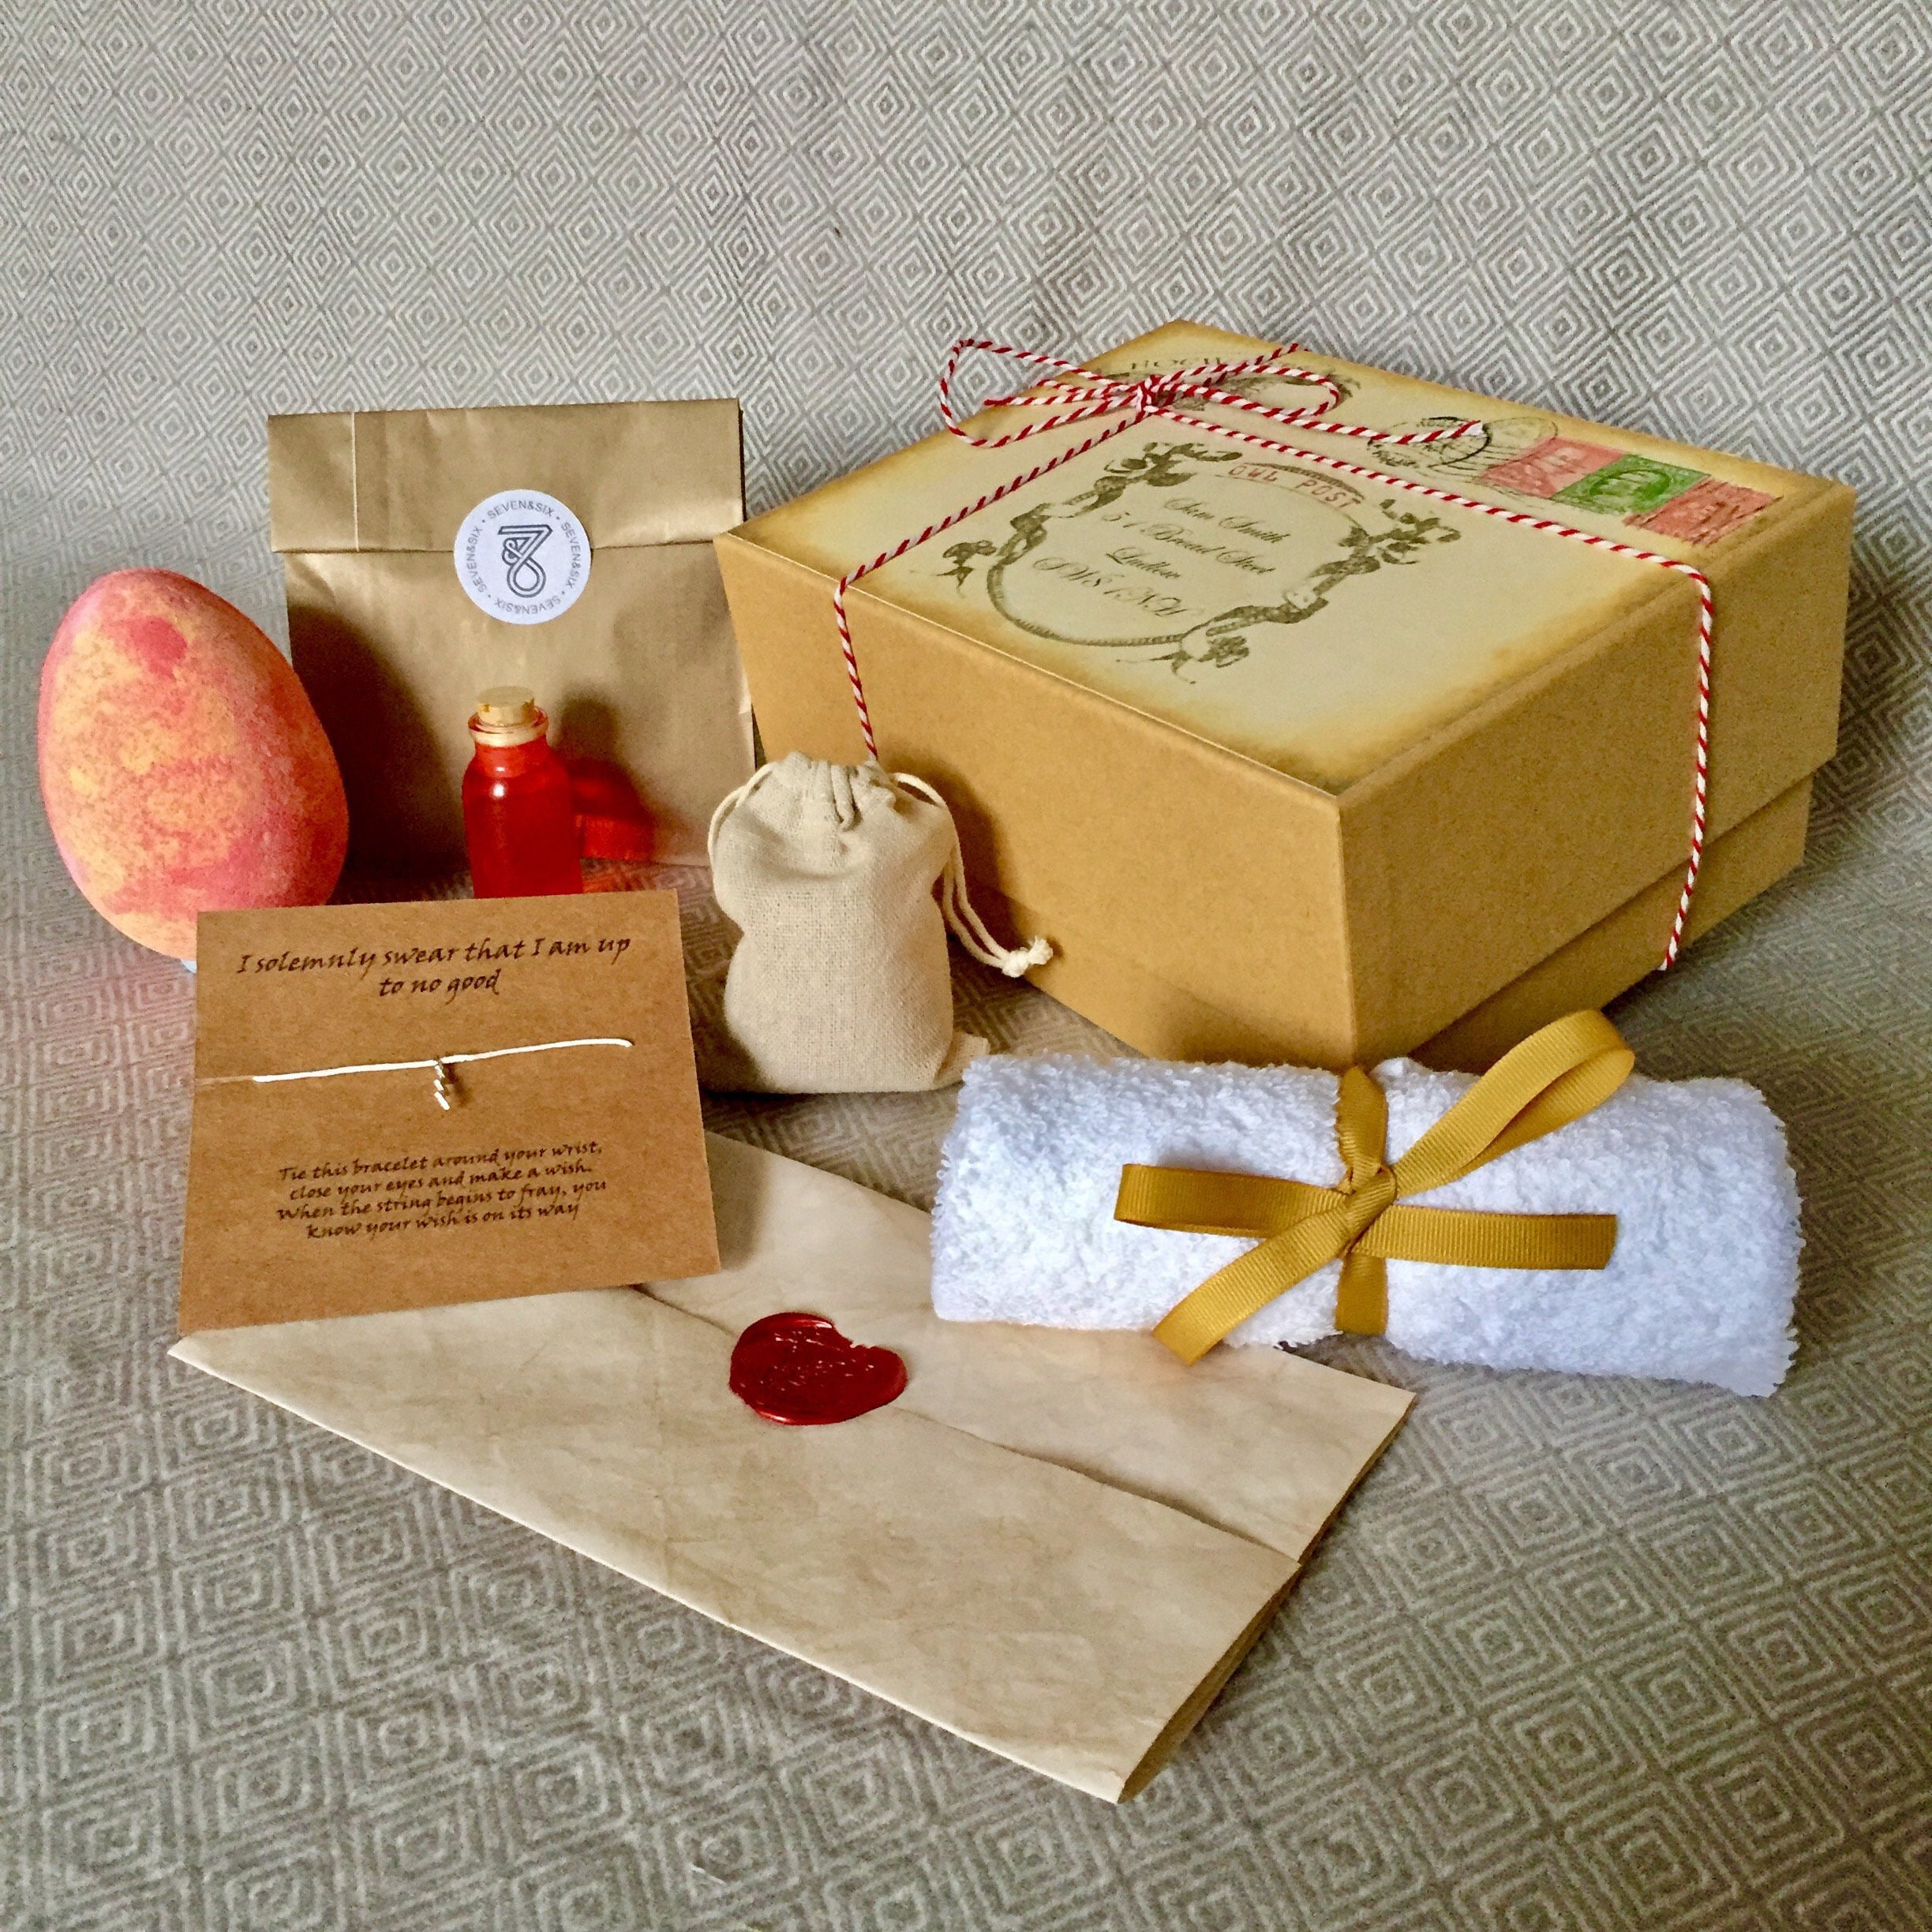 The Perfect Harry Potter Gift - A Golden Snitch Bath Bomb